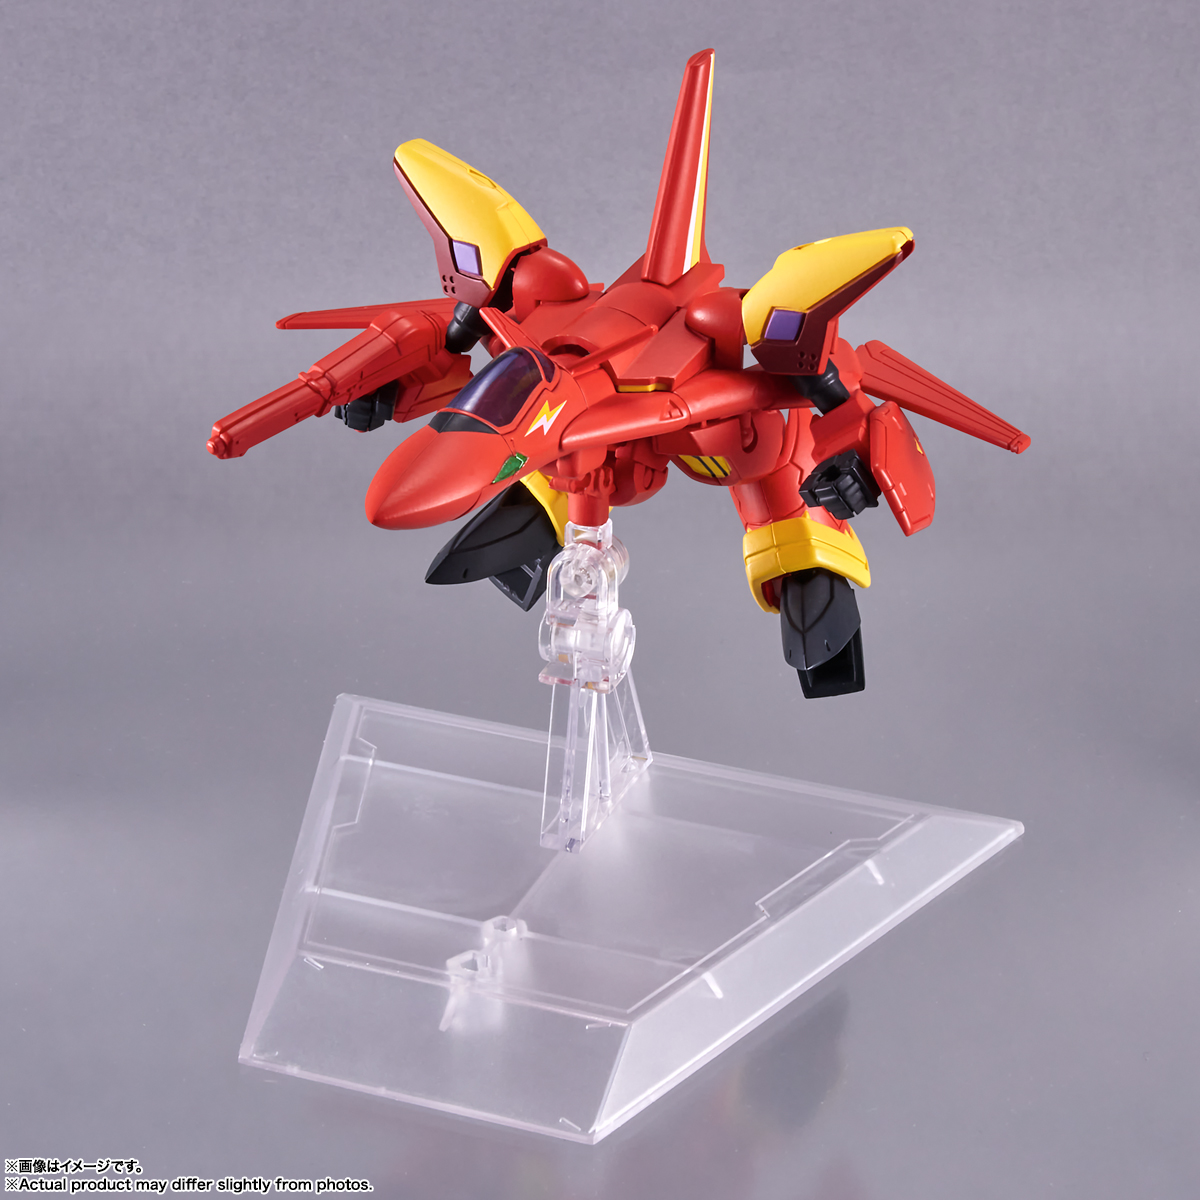 macross-7-vf-19-custom-fire-valkyrie-and-basara-nekki-tiny-session-action-figure-set image count 4